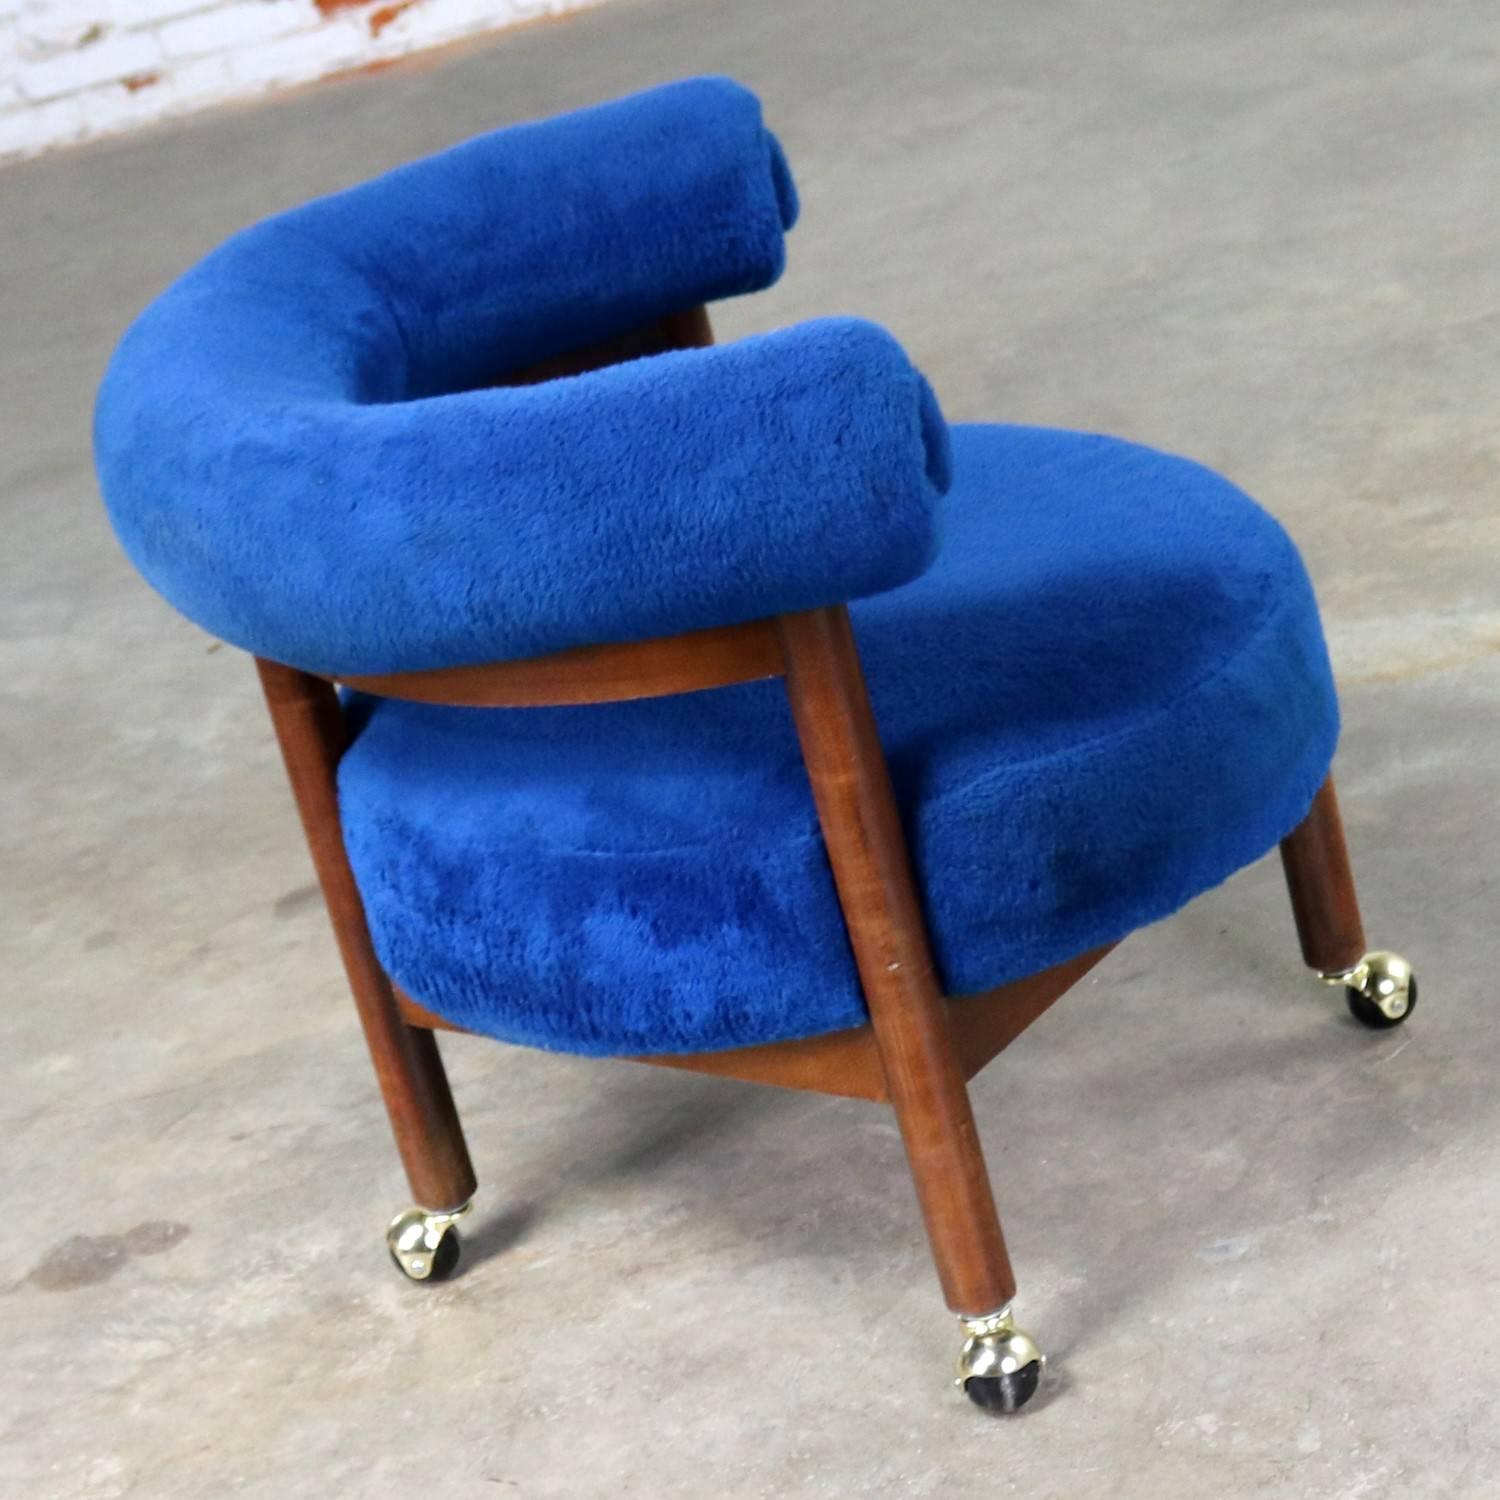 20th Century Royal Blue Round Corner Chair with Bolster Back on Casters Midcentury